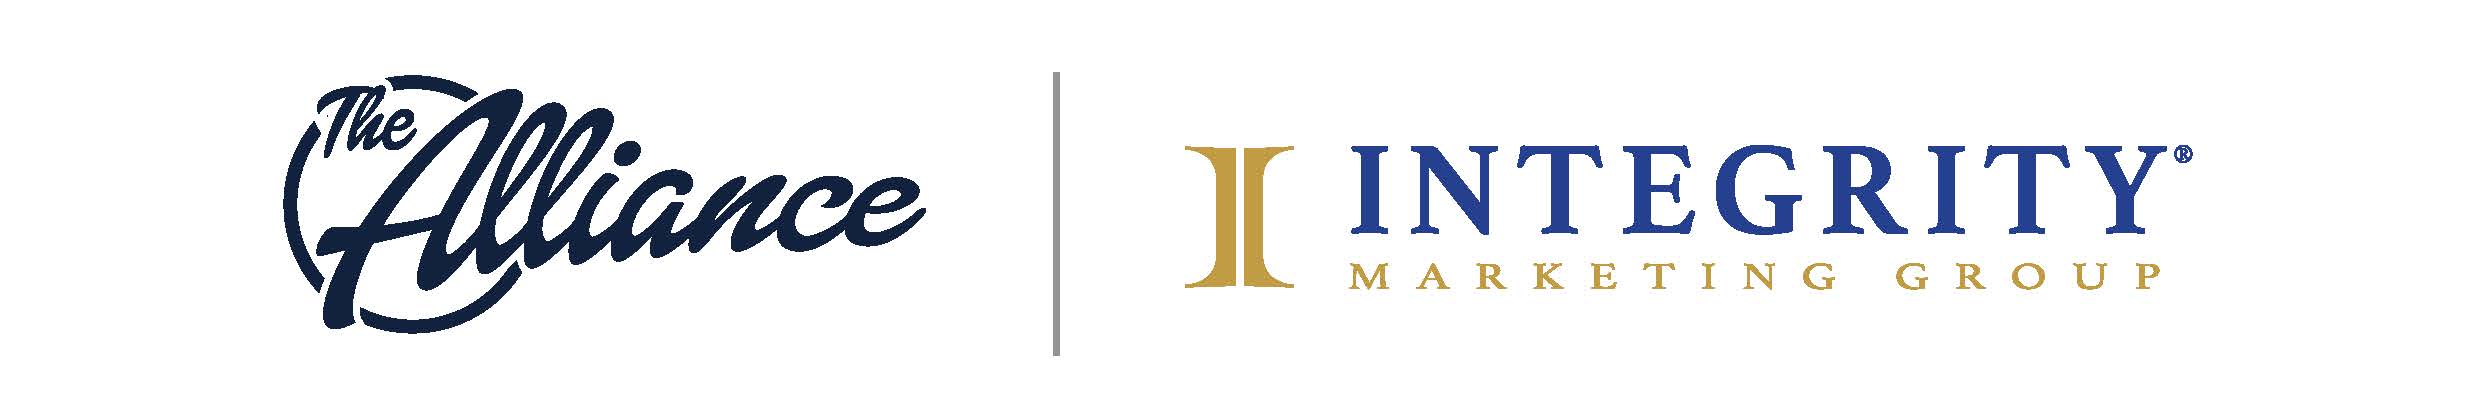 The Alliance Joins Integrity Marketing  Group